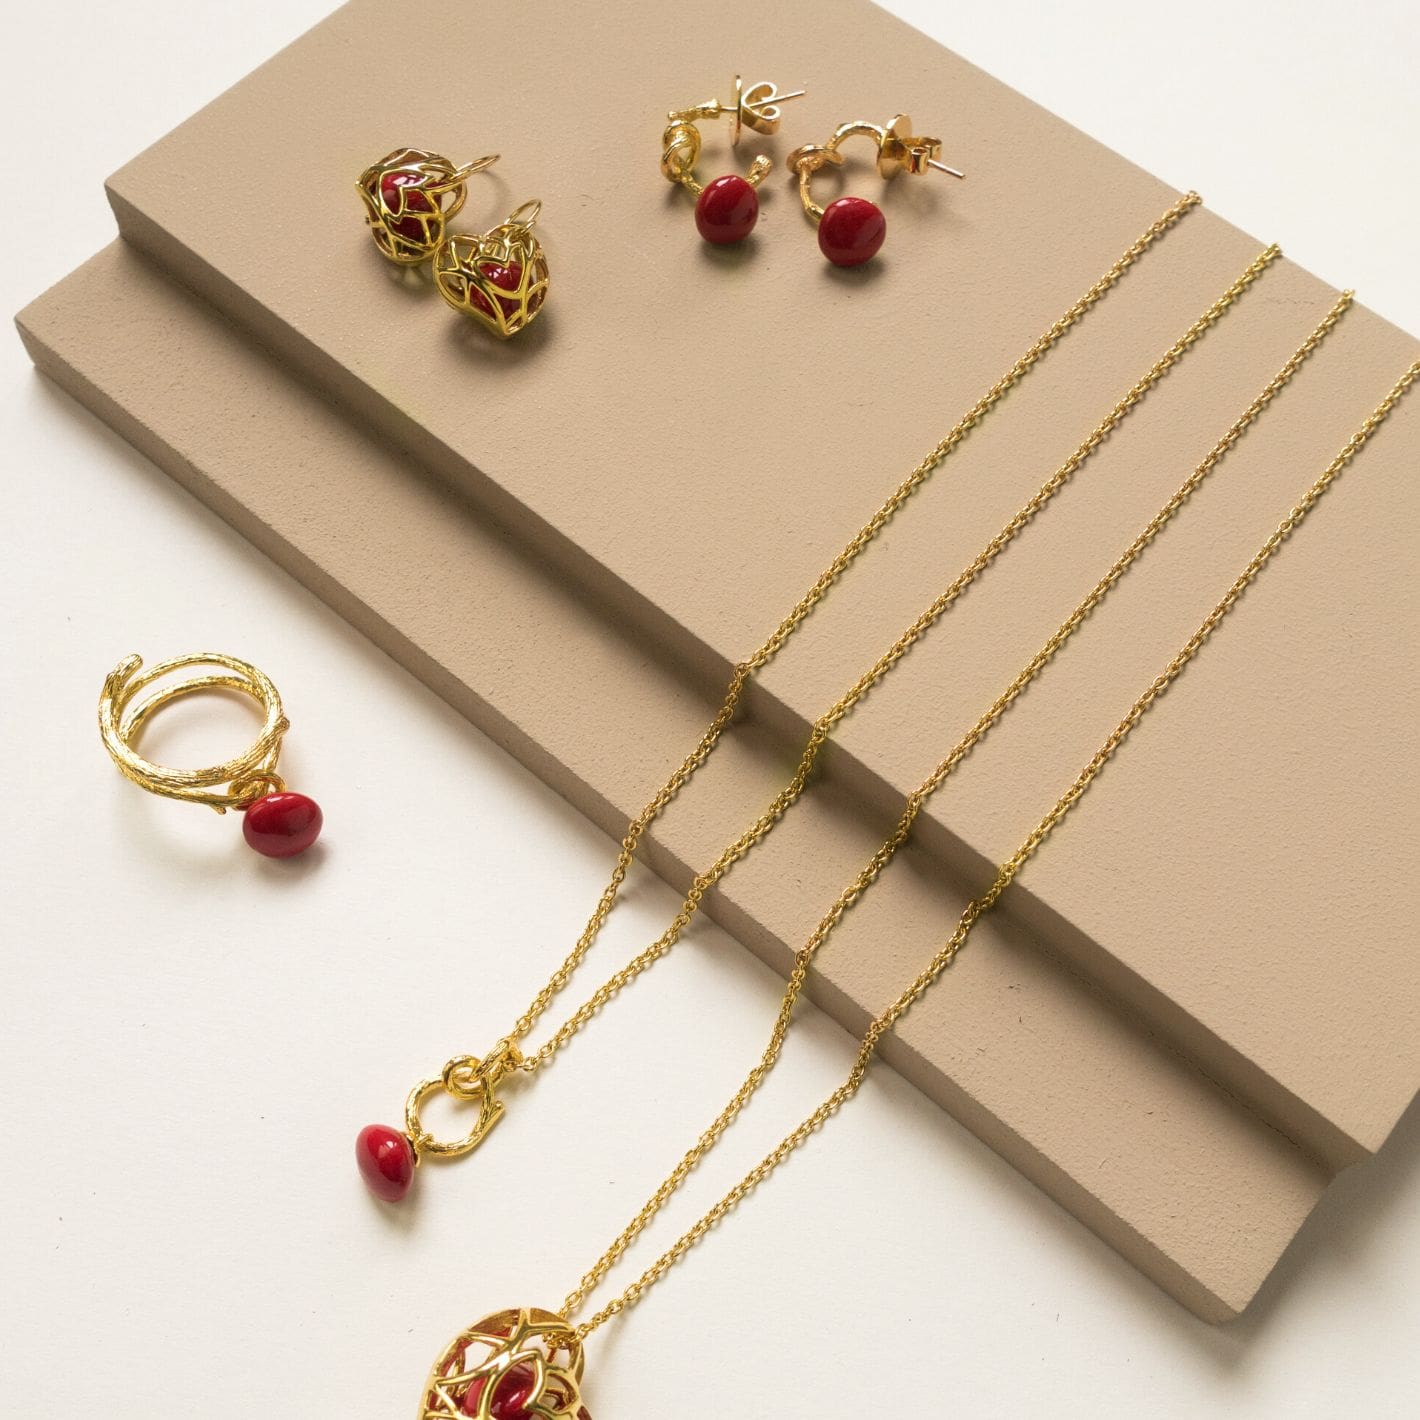 Romantic Rose & Saga Seed Jewellery to Gift this Valentine’s Day